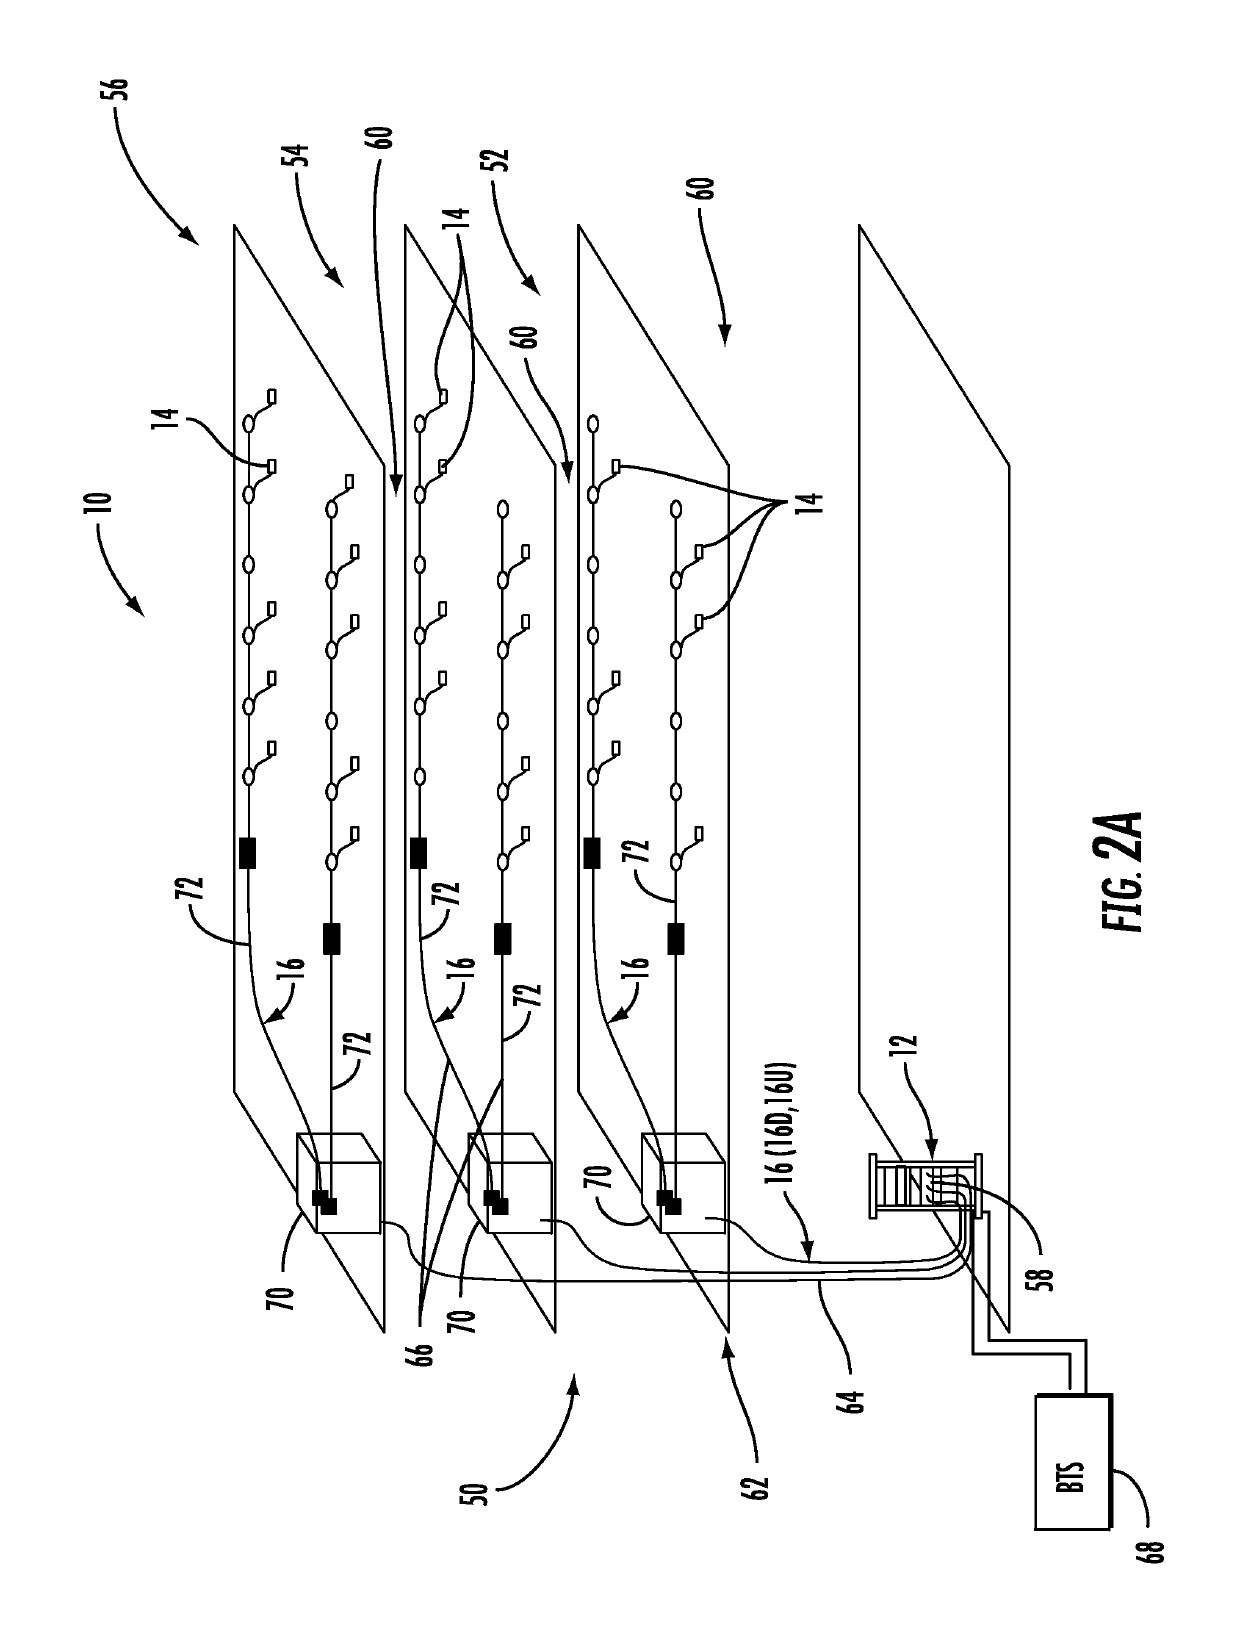 Power management for distributed communication systems, and related components, systems, and methods